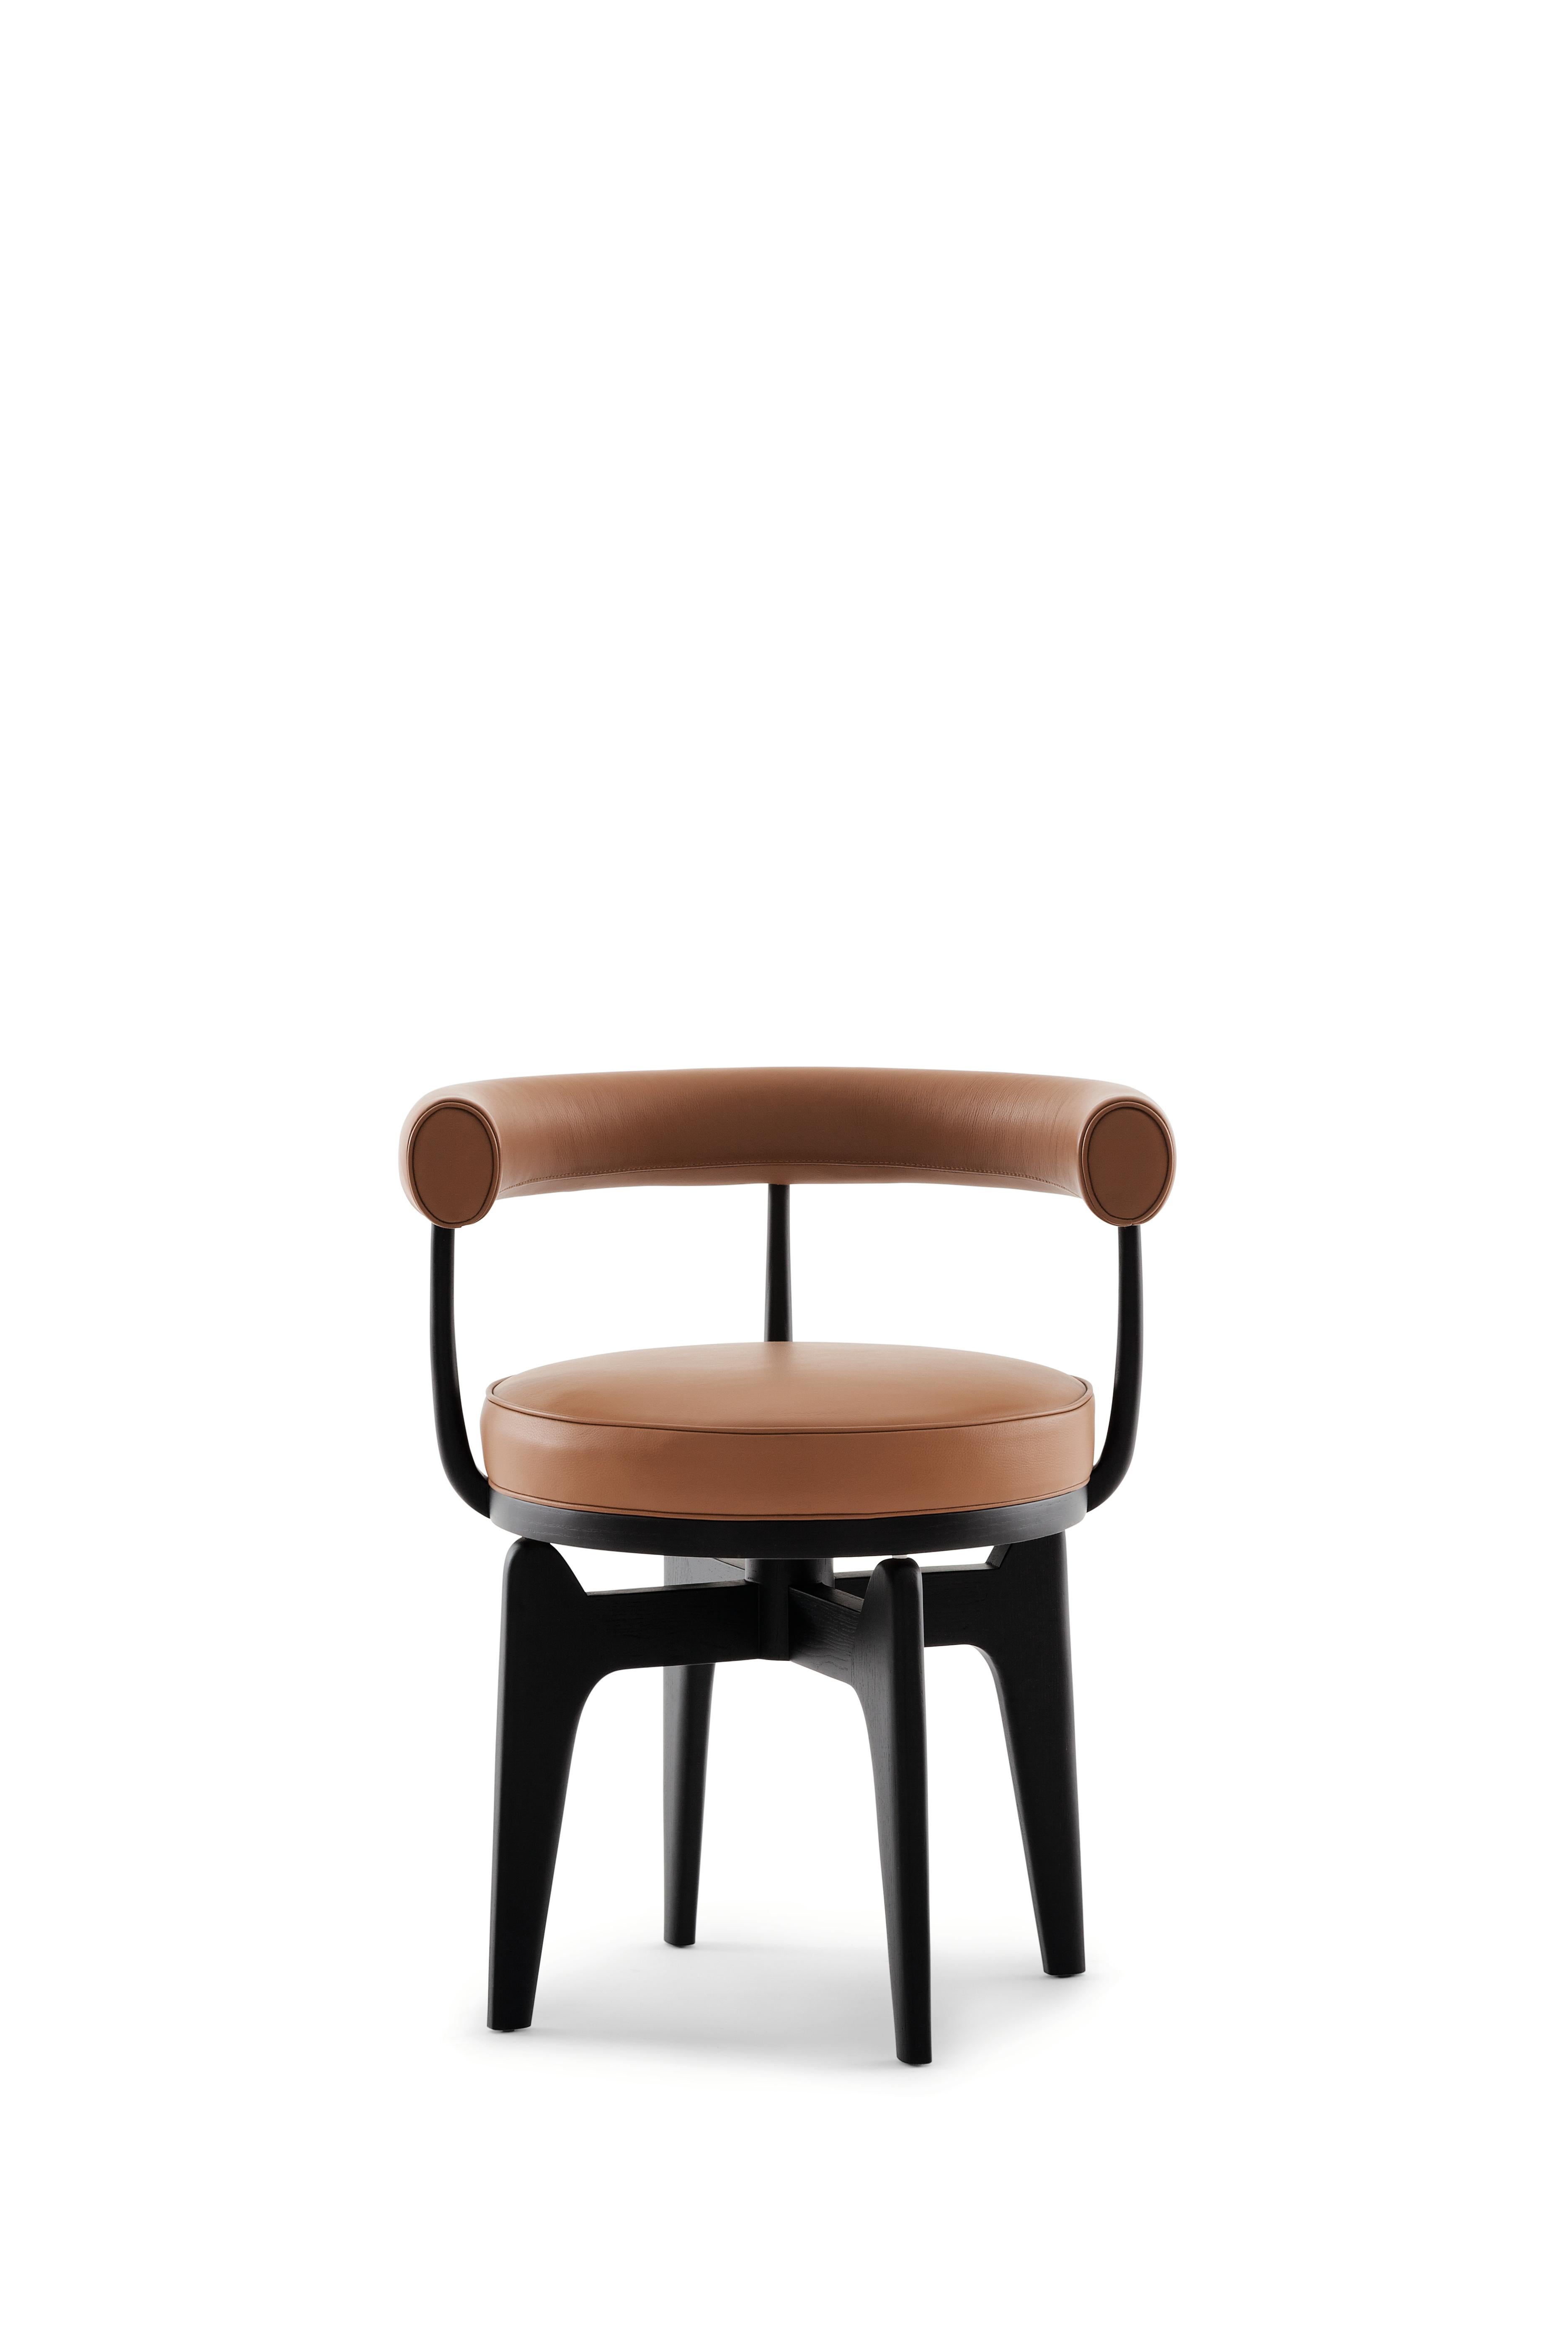 charlotte perriand indochine chair